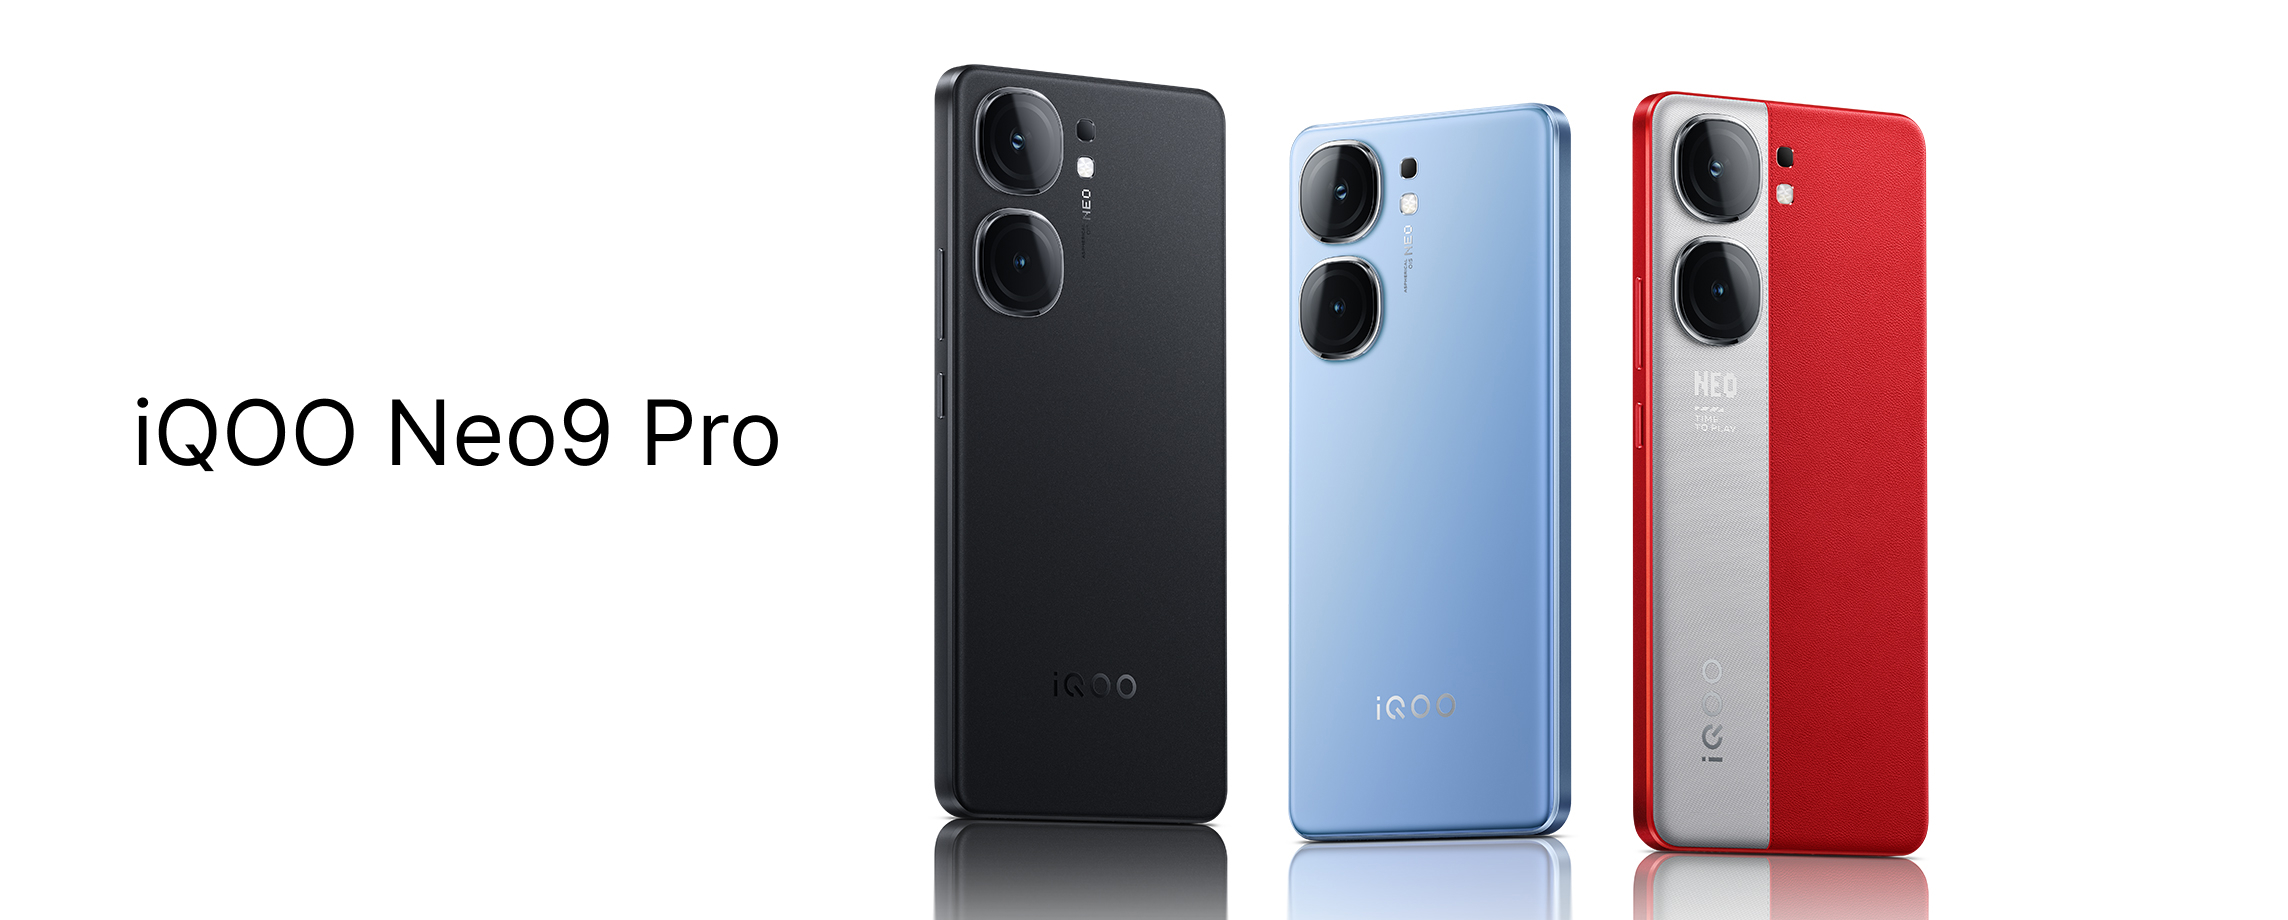 iQOO Neo9 Pro: Luxurious design and performance at a mid-range price